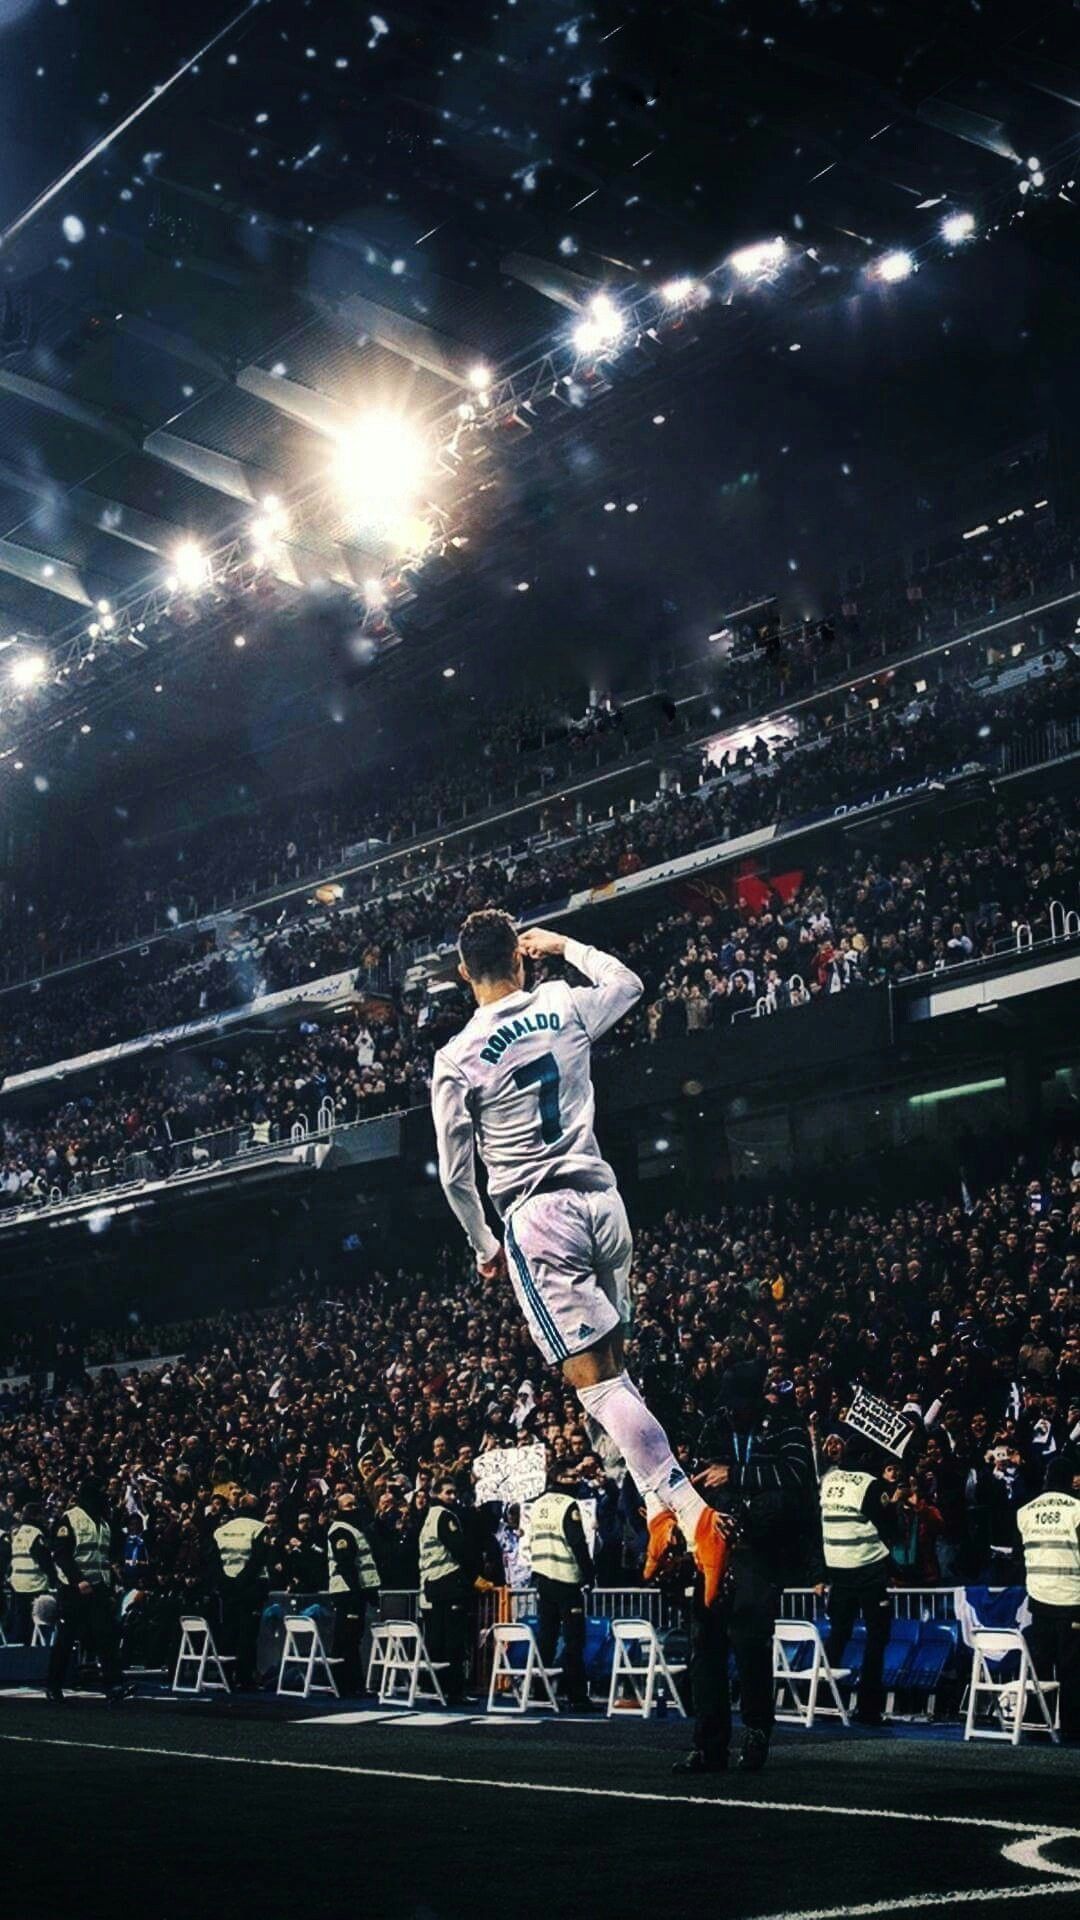 Free download Cristiano Ronaldo iPhone Wallpaper [1080x1920] for your Desktop, Mobile & Tablet. Explore iPhone Wallpaper Supreme Goals. iPhone Wallpaper Supreme Goals, Goals Background, Supreme IPhone Wallpaper